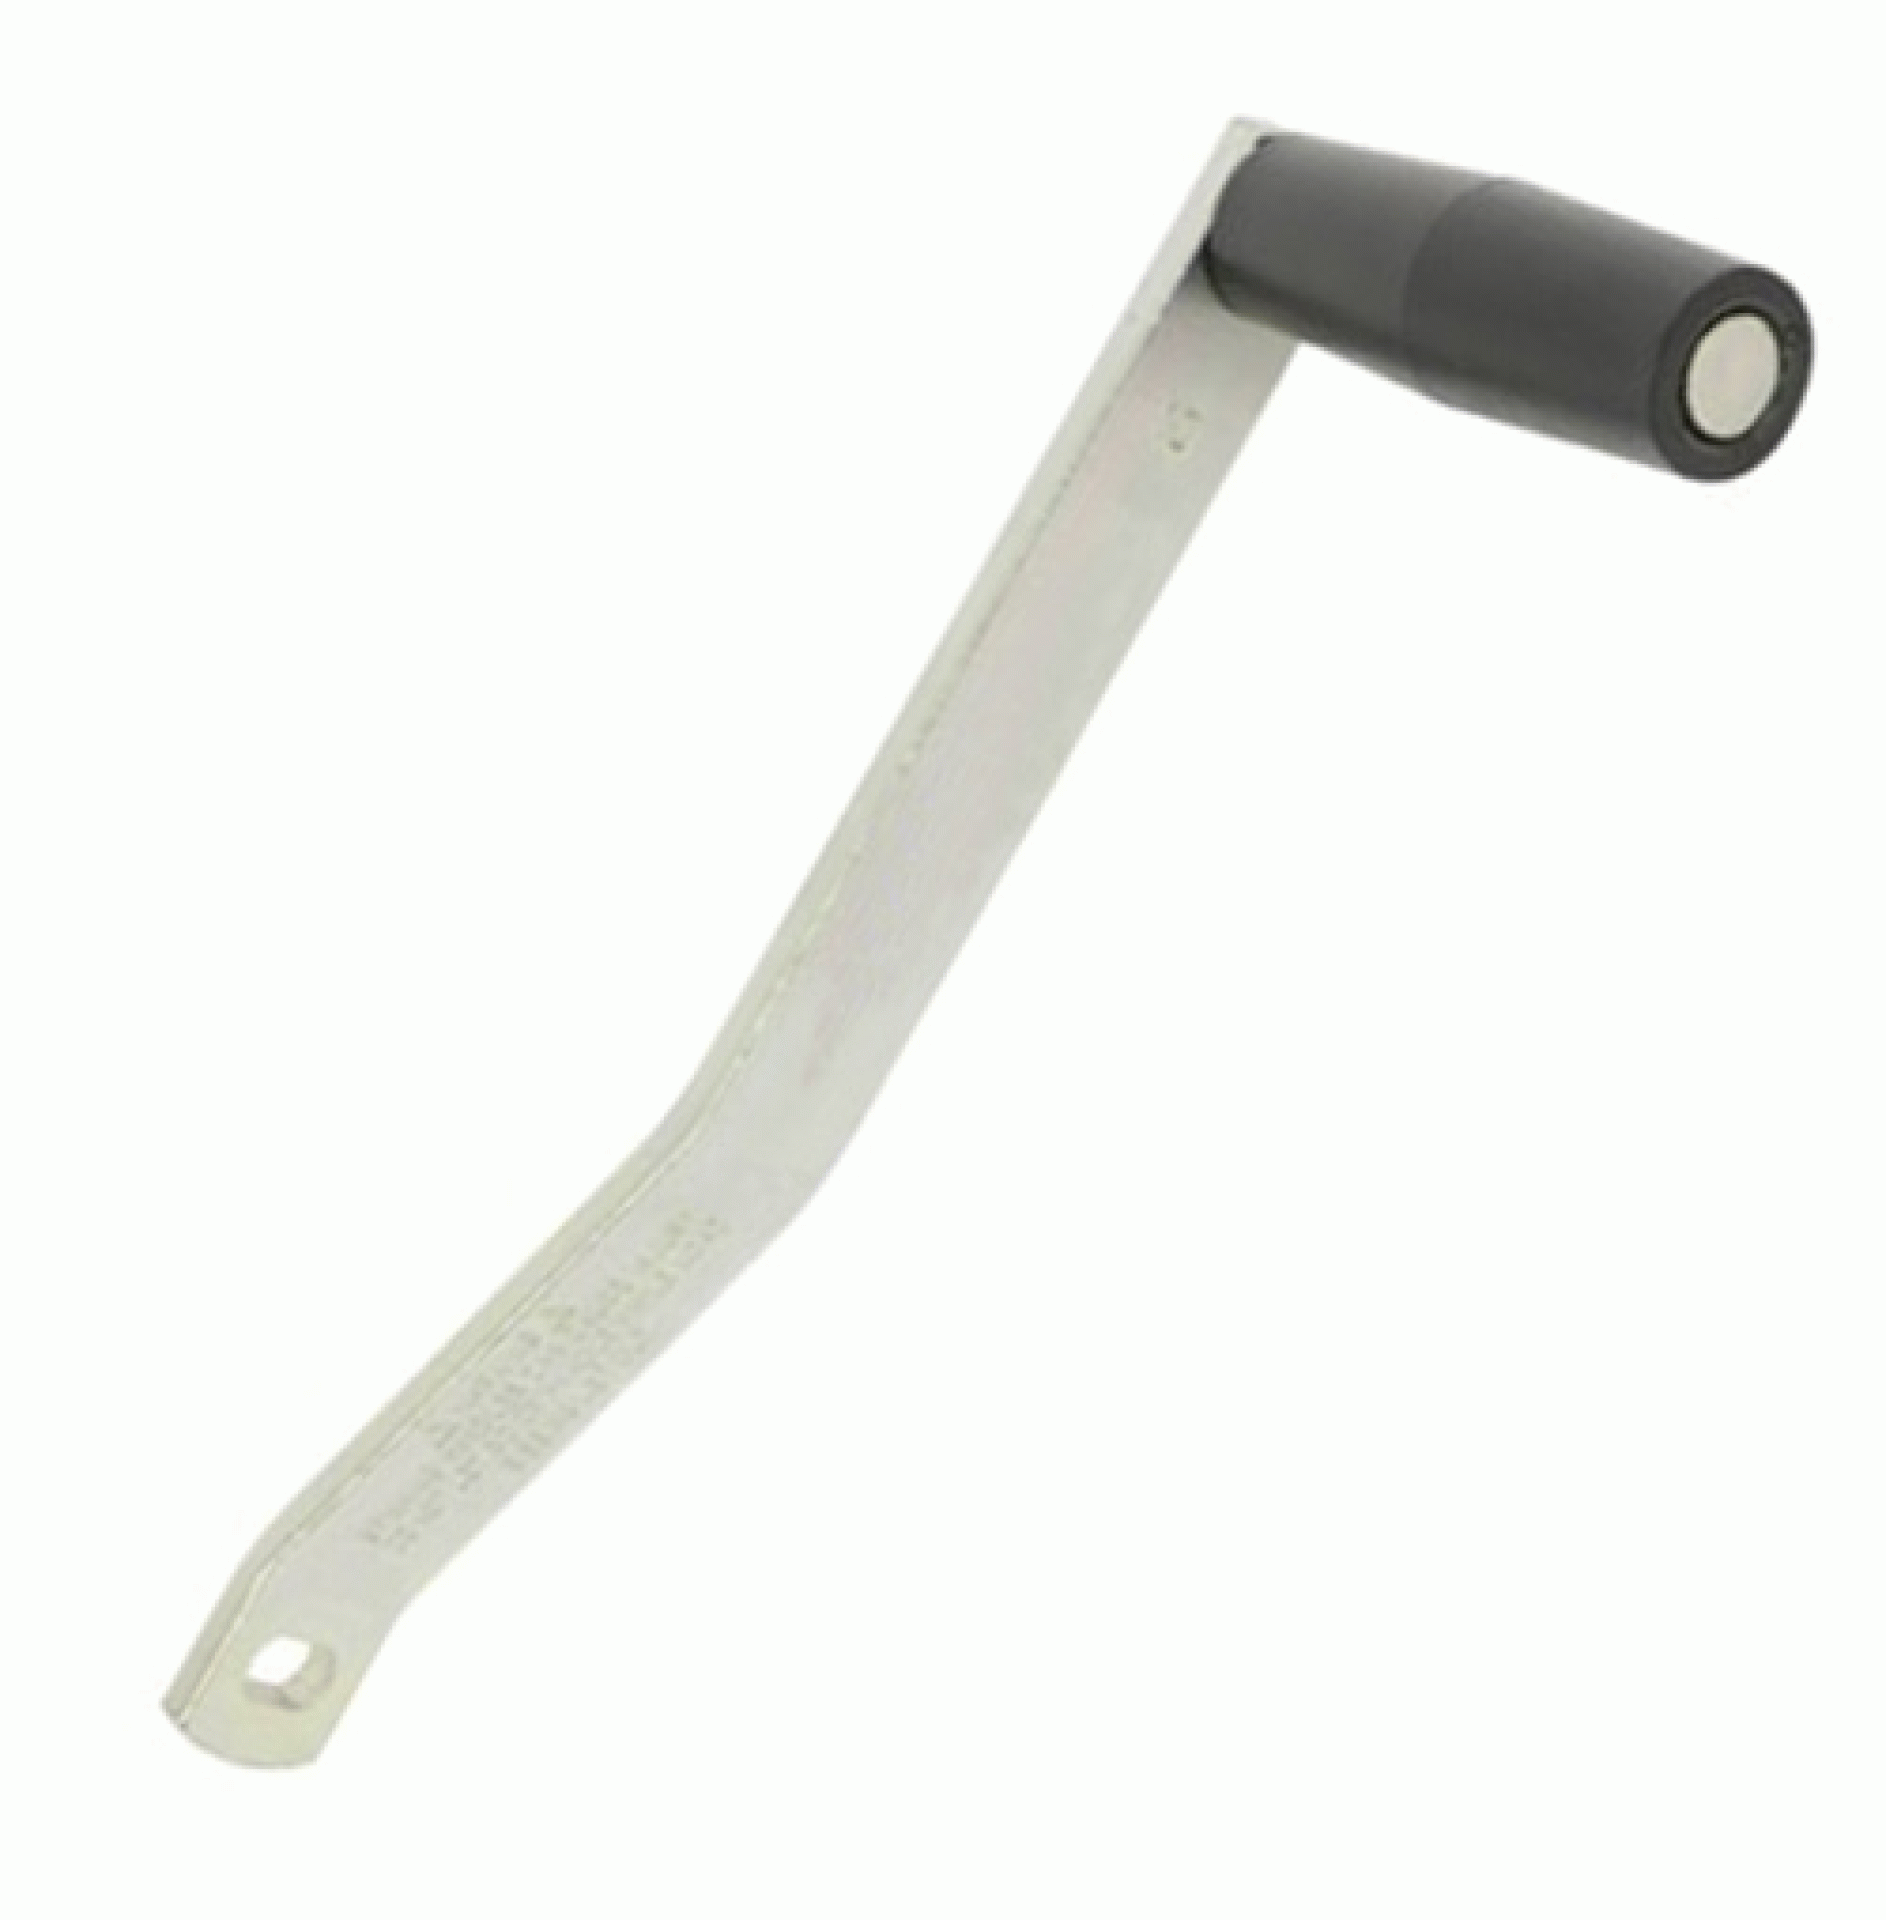 FULTON PERFORMANCE PRODUCTS | 501108 | Trailer Winch Handle - 10"